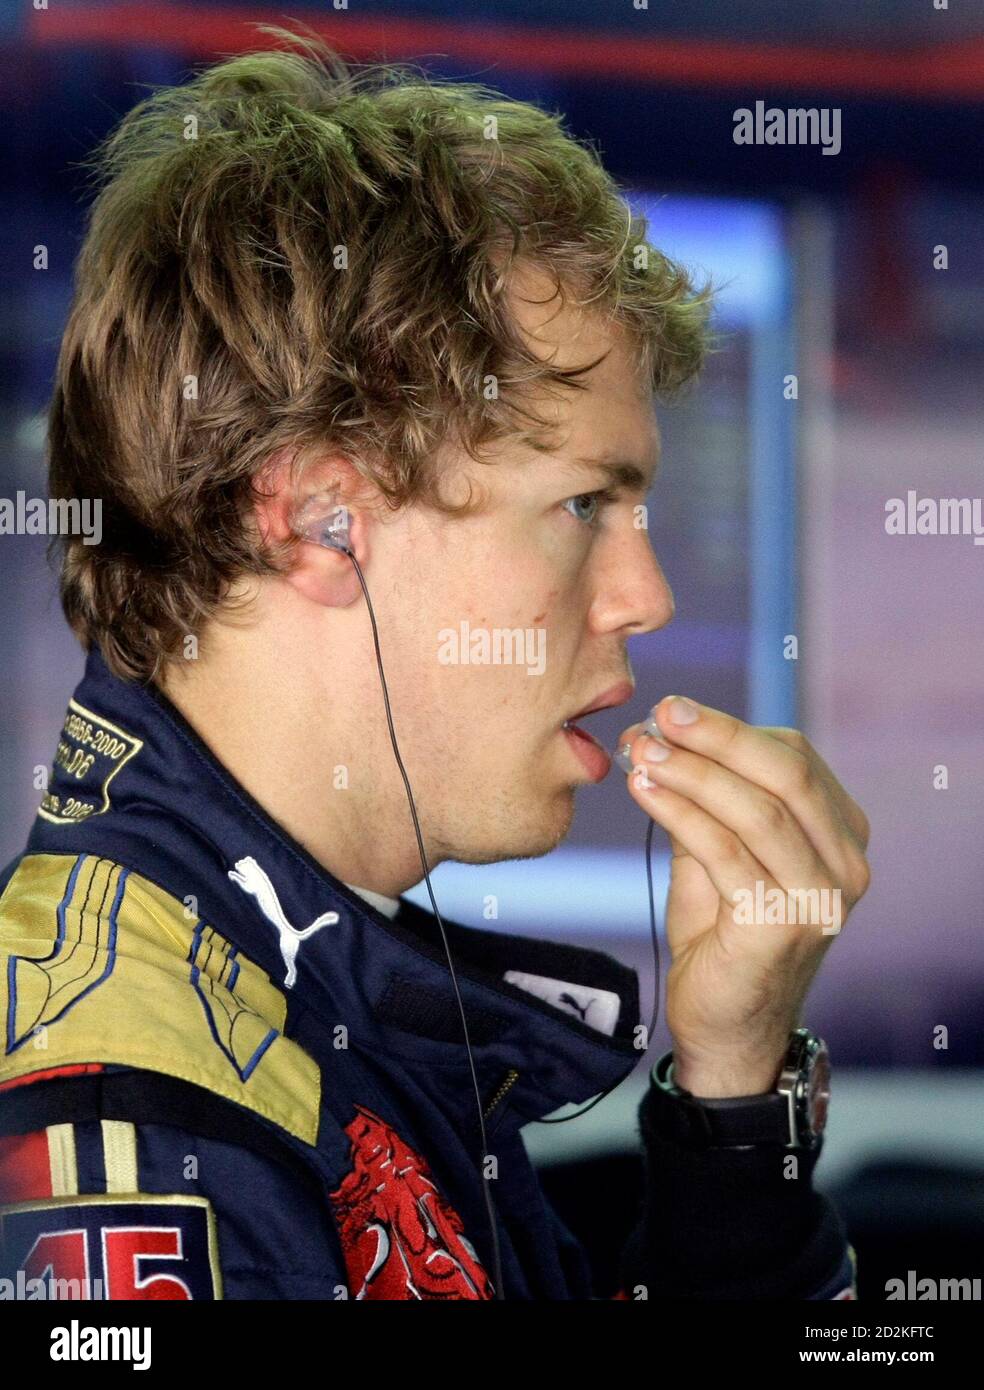 Toro Rosso Formula One driver Sebastian Vettel of Germany puts in his ear  plugs while in the pit during a three-day test drive at the Hockenheim race  track July 10, 2008. REUTERS/Alex